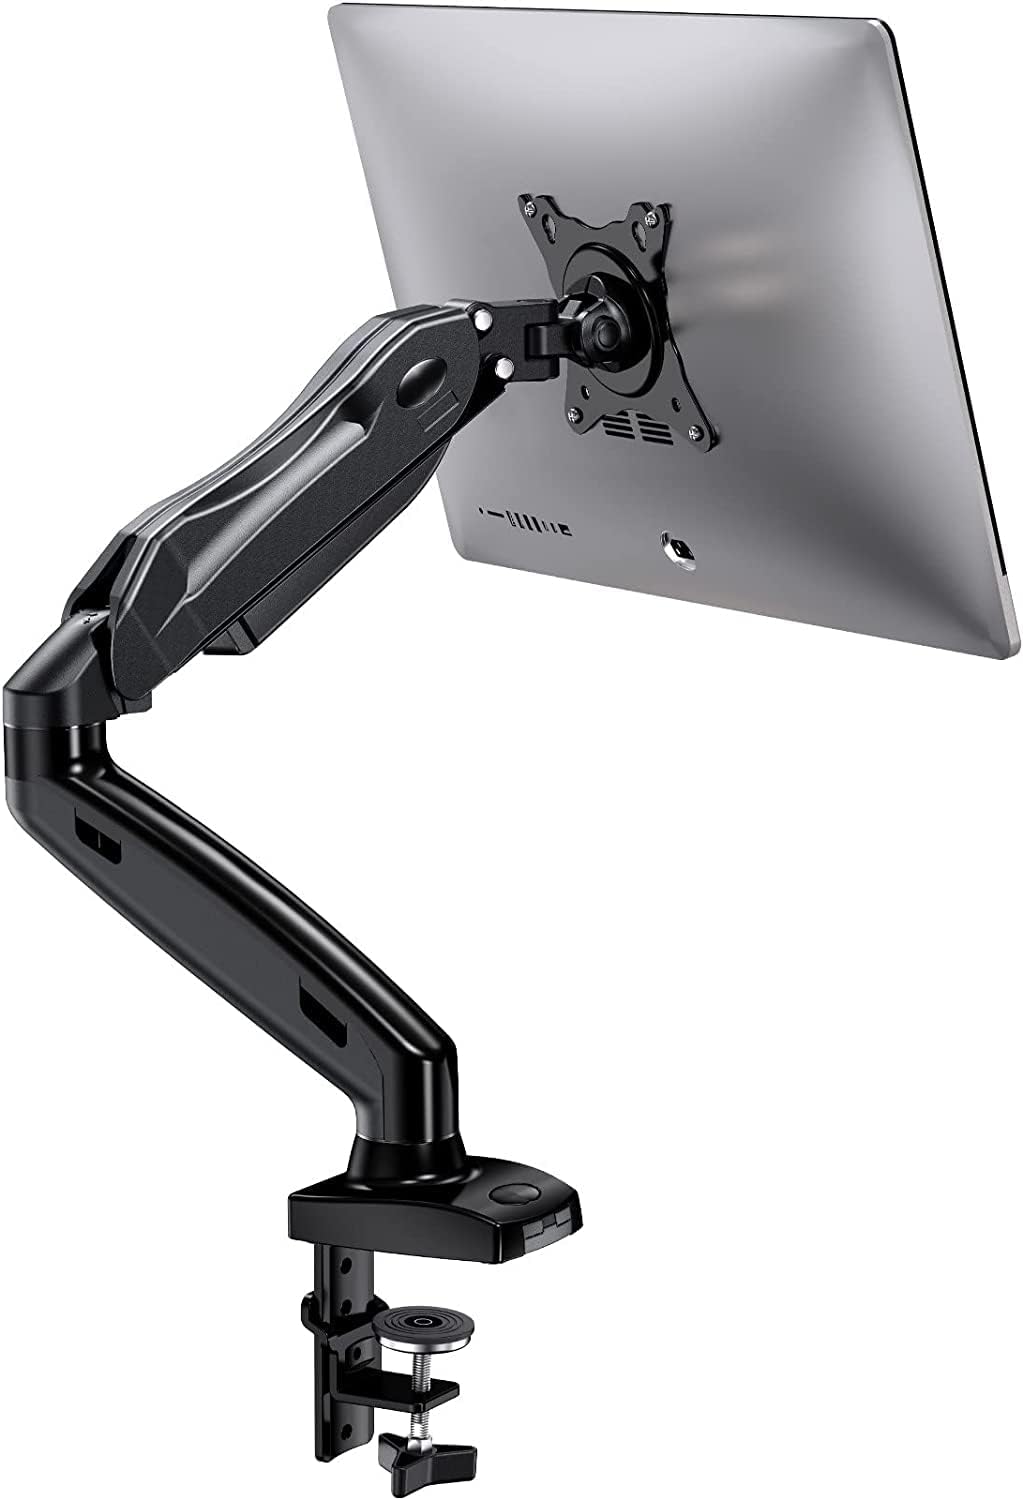 HUANUO Single Monitor Mount, Articulating Gas Spring [...]